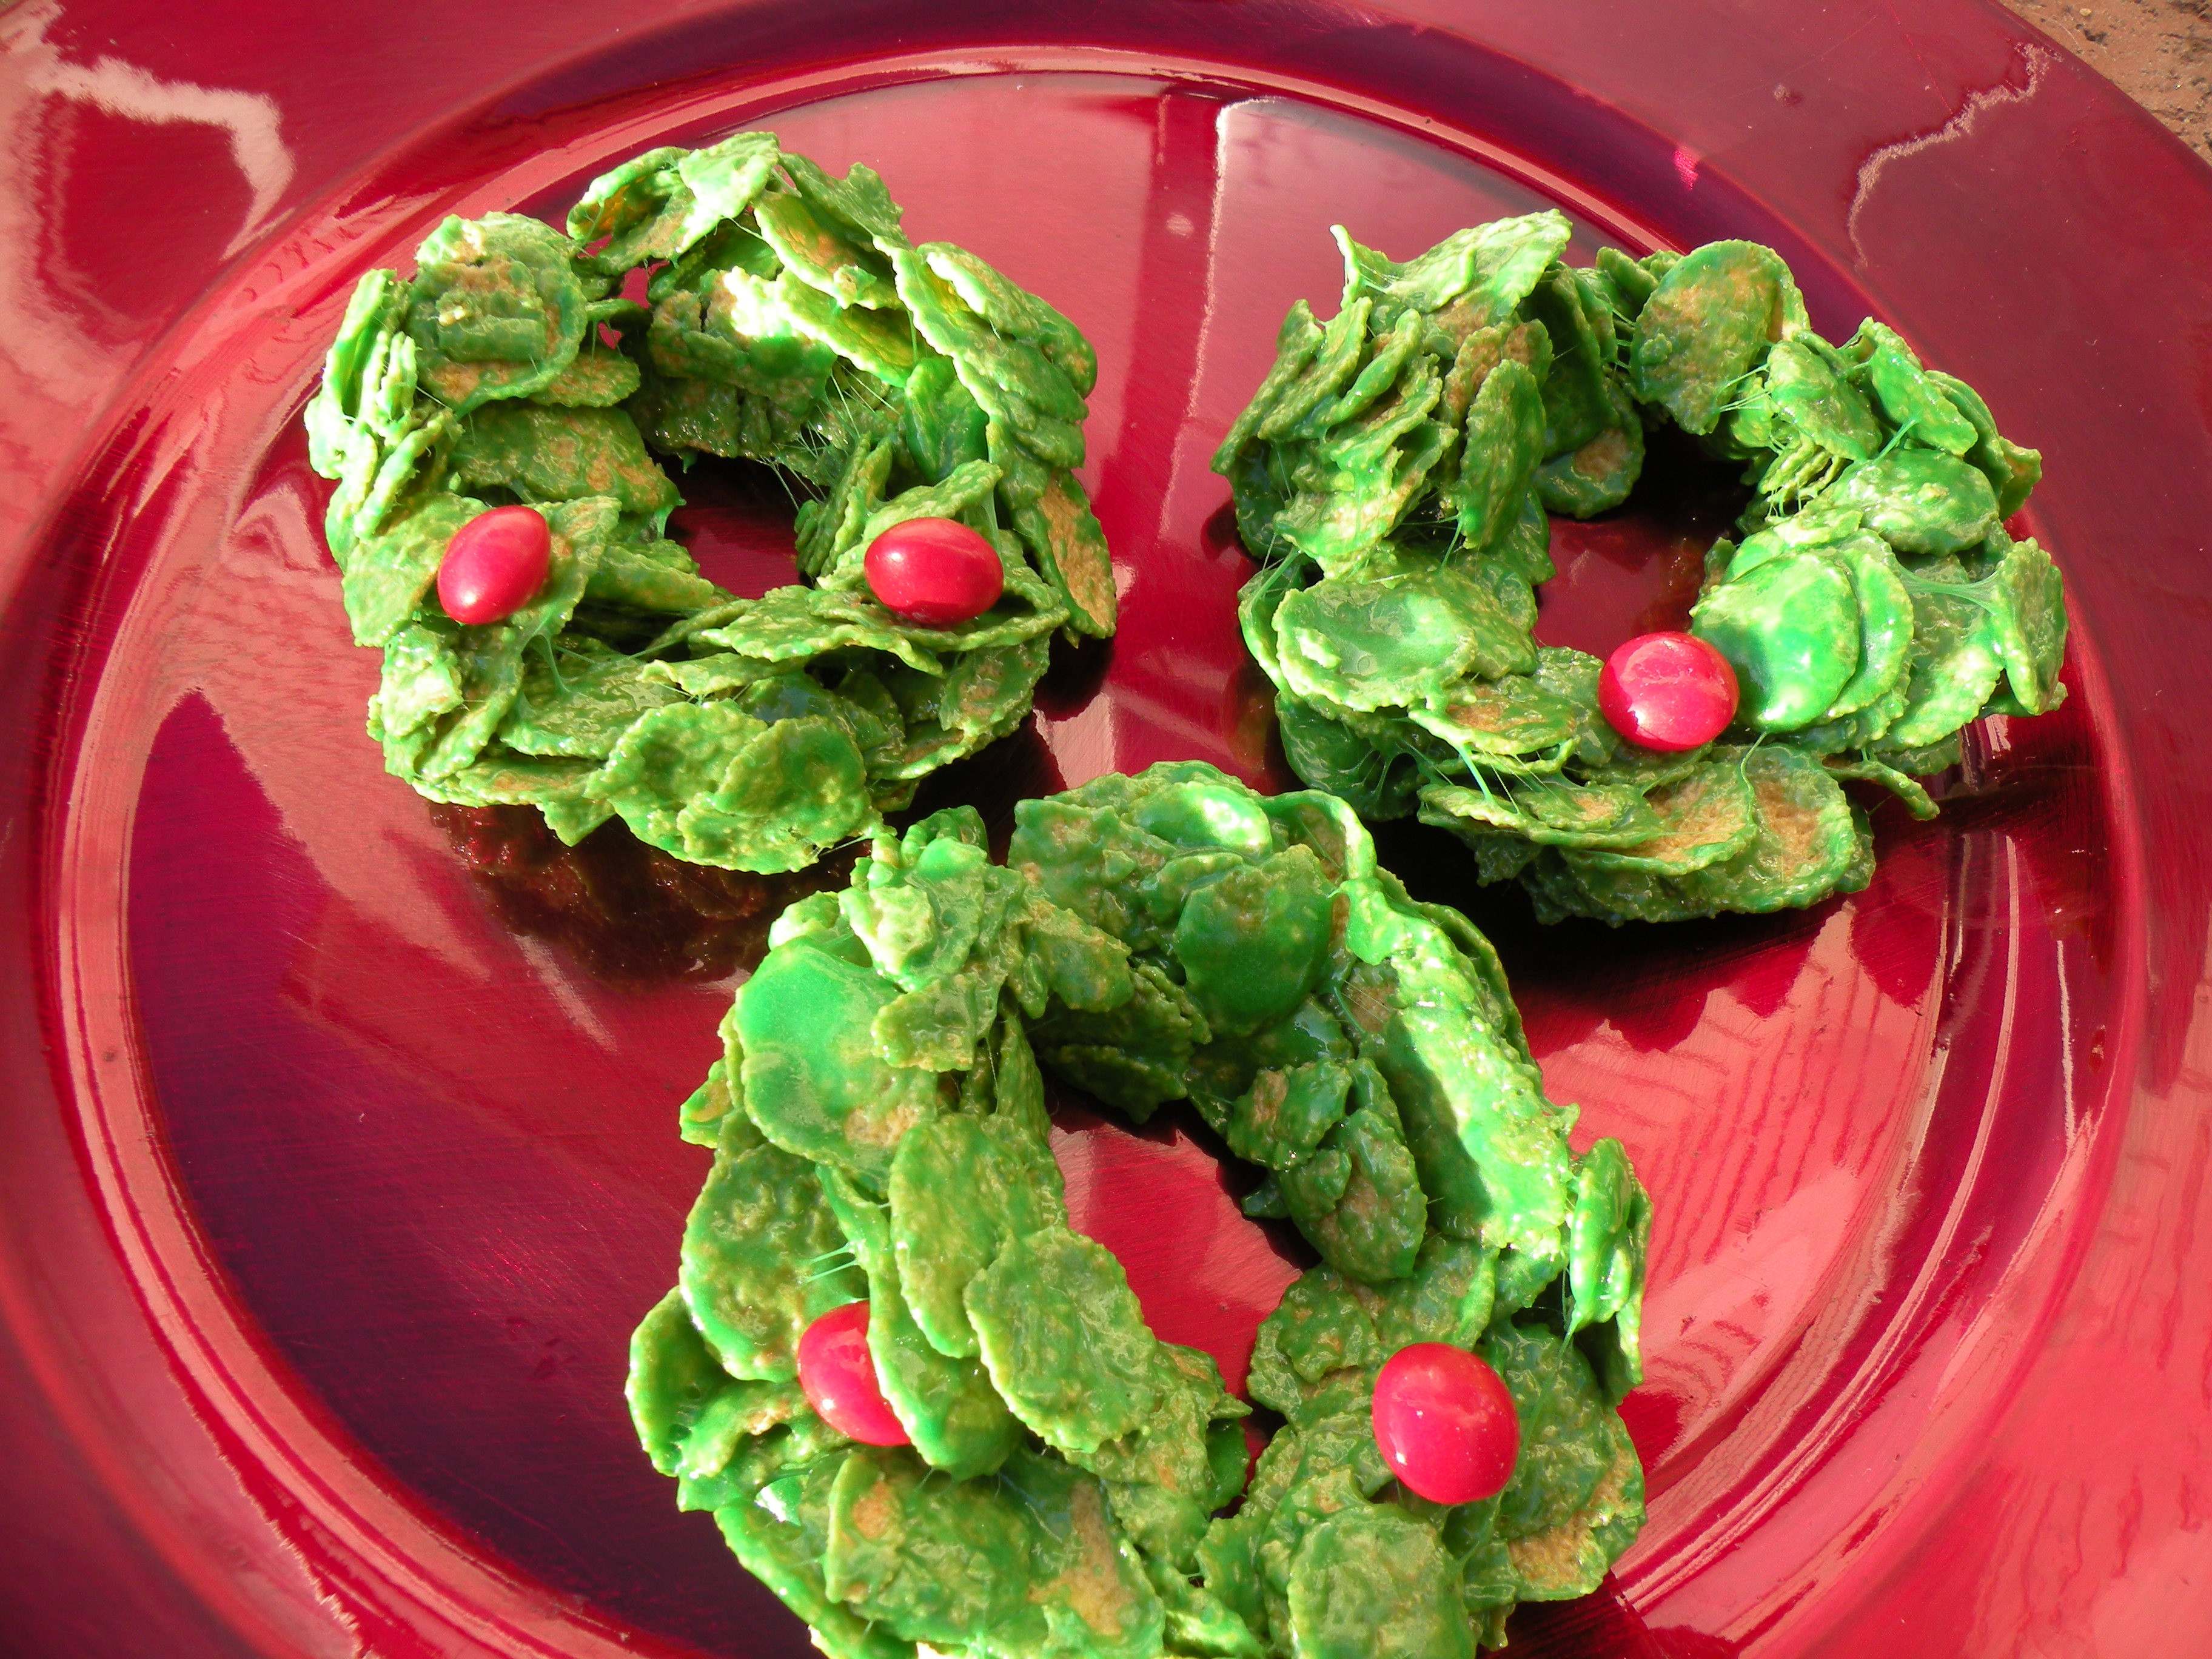 Christmas Wreath Cookies With Corn Flakes
 Gluten Free Corn Flake Wreath Cookies